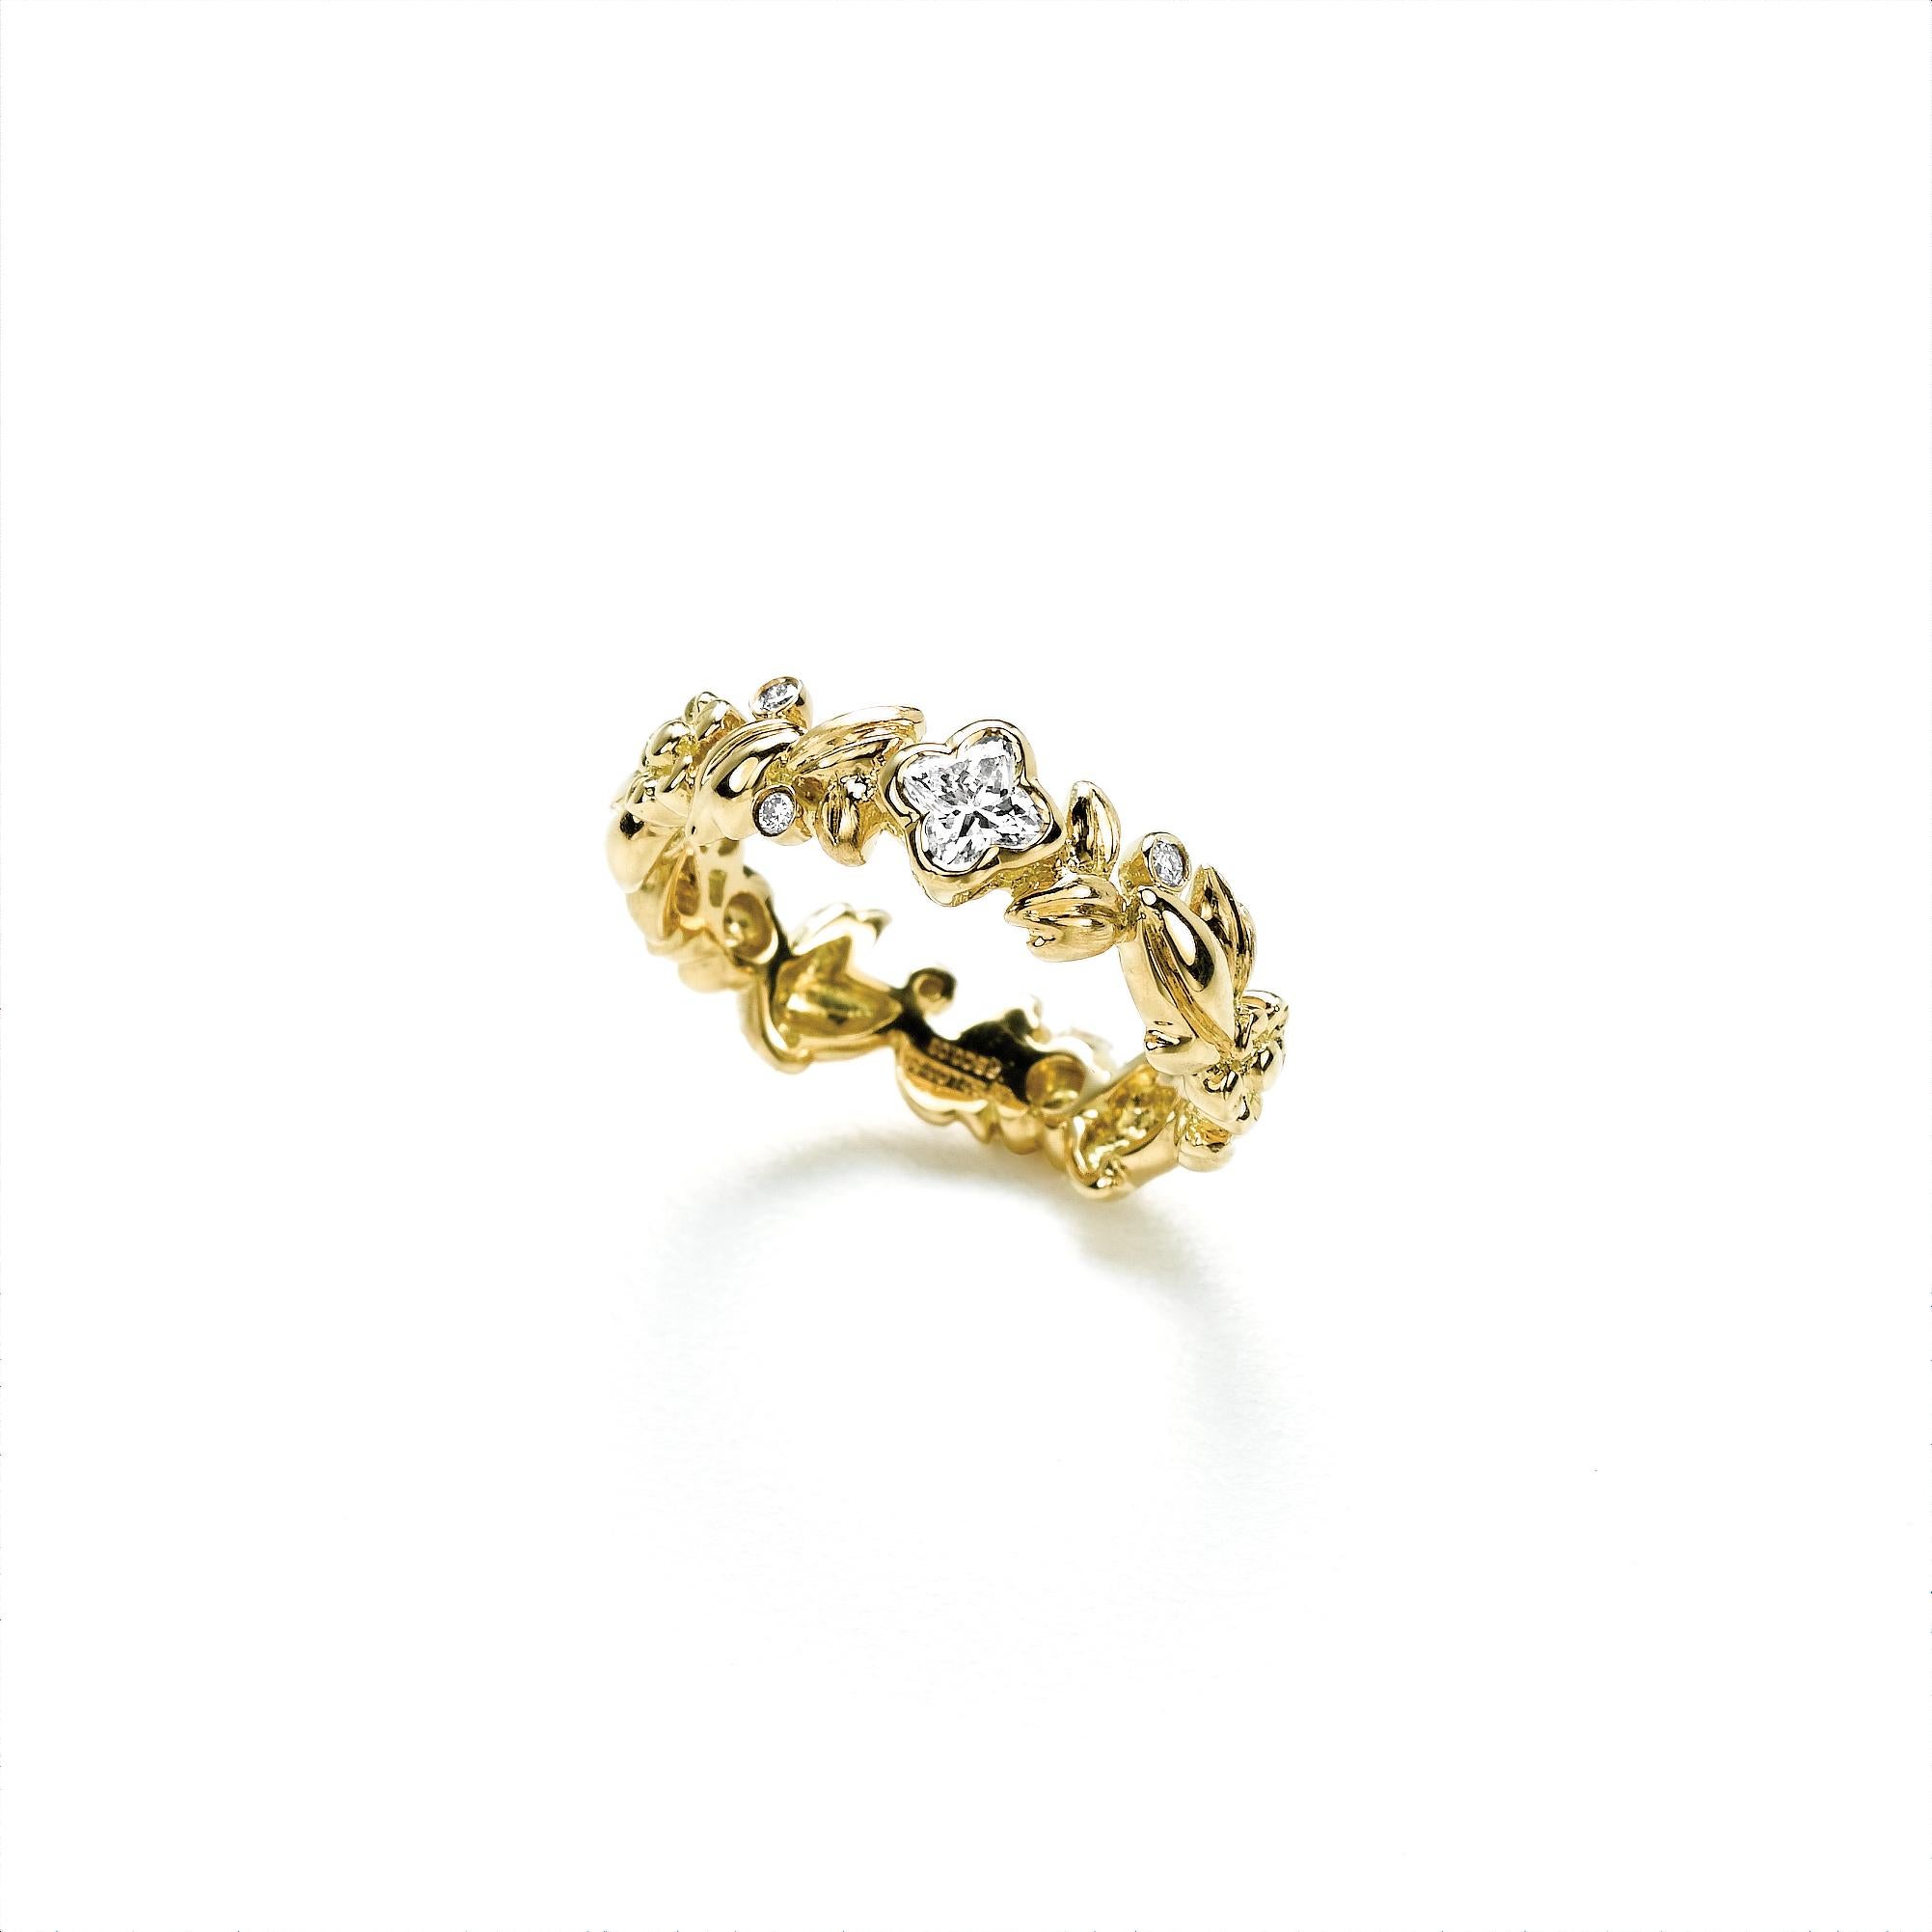 18 Karat Yellow Gold  Diamond Flower leaf ring 0.28 Carat Total . .1 LILY CUT ® flower shape diamond H color VS SI clarity  0.25 cts . Additional 0.03 ct round diamond accent . Available in  Finger sizes 5,6,7 .
